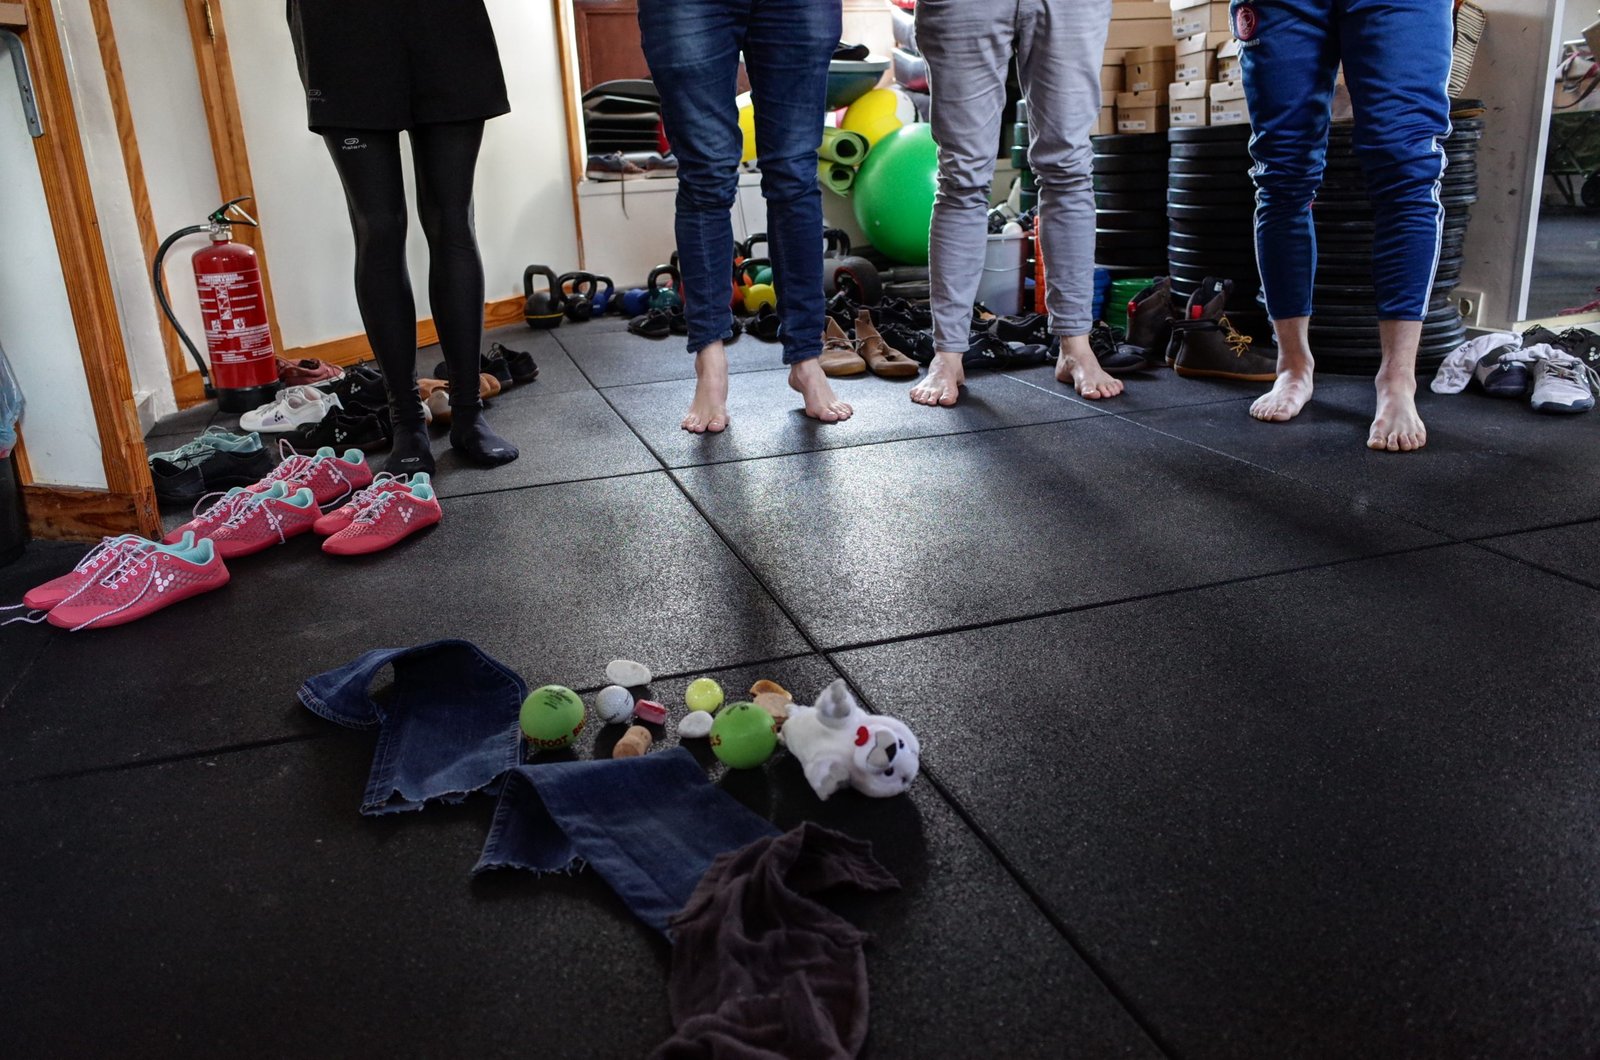 How long does it take to transition to barefoot shoes? - Proactive